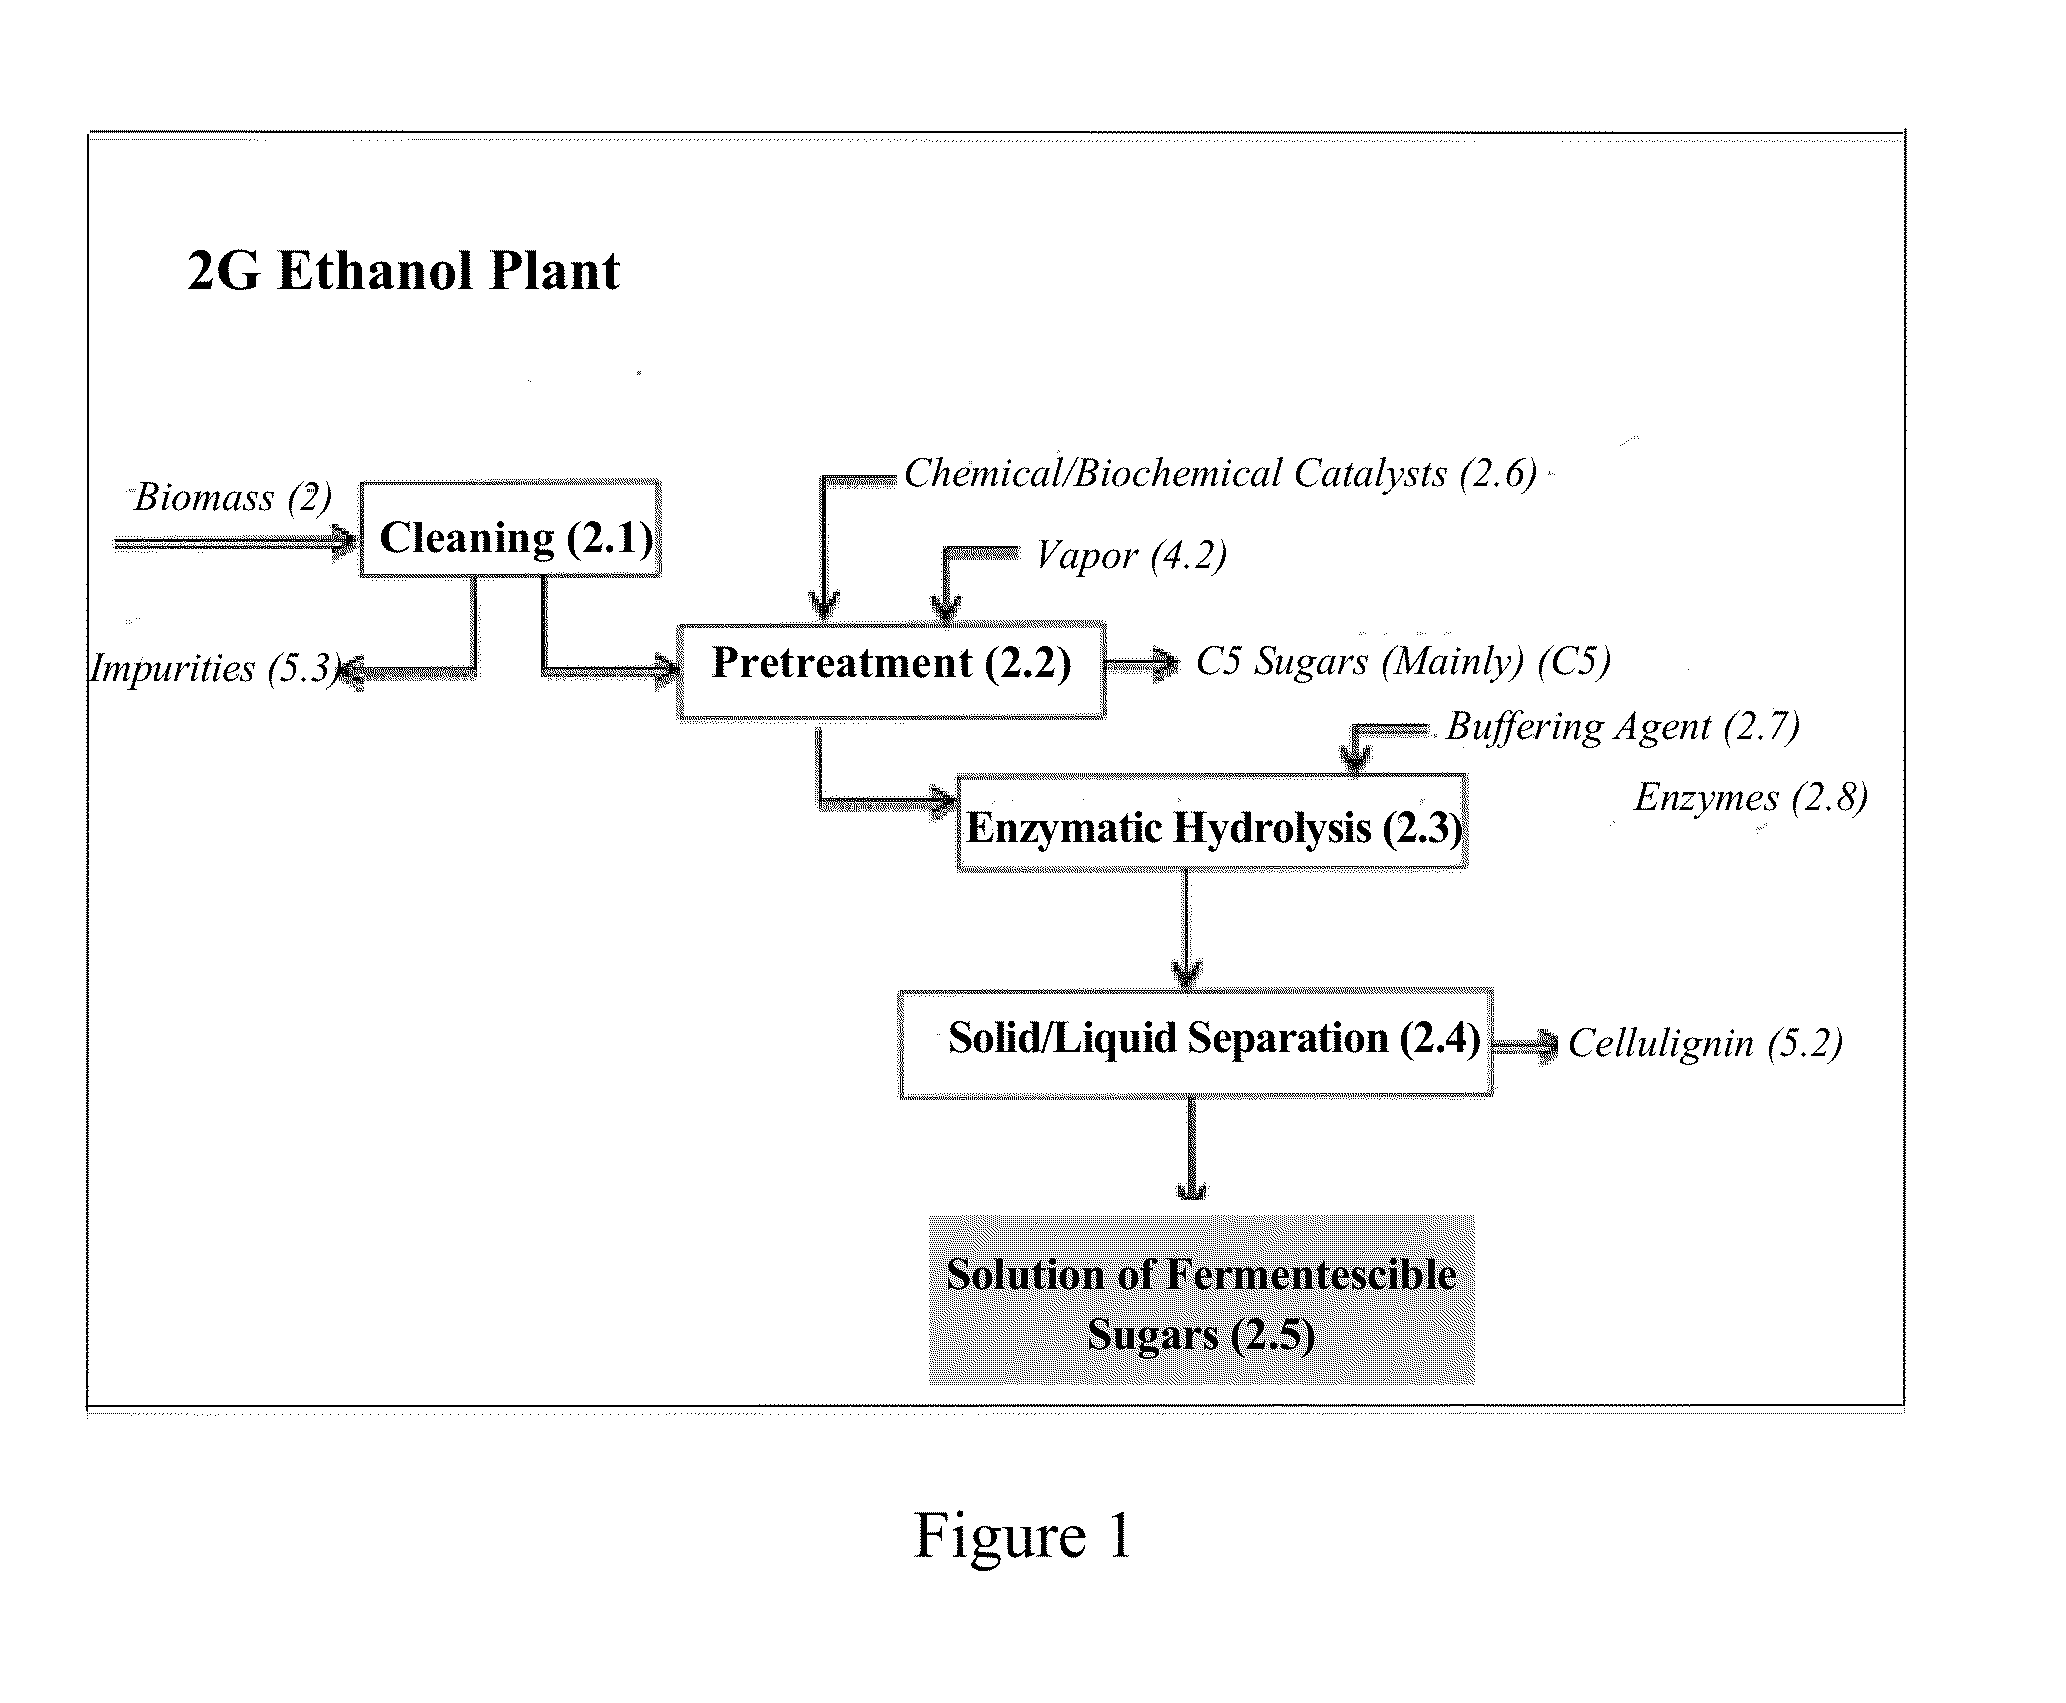 System and method for the integrated production of first and second generation ethanol and the use of integration points for such production